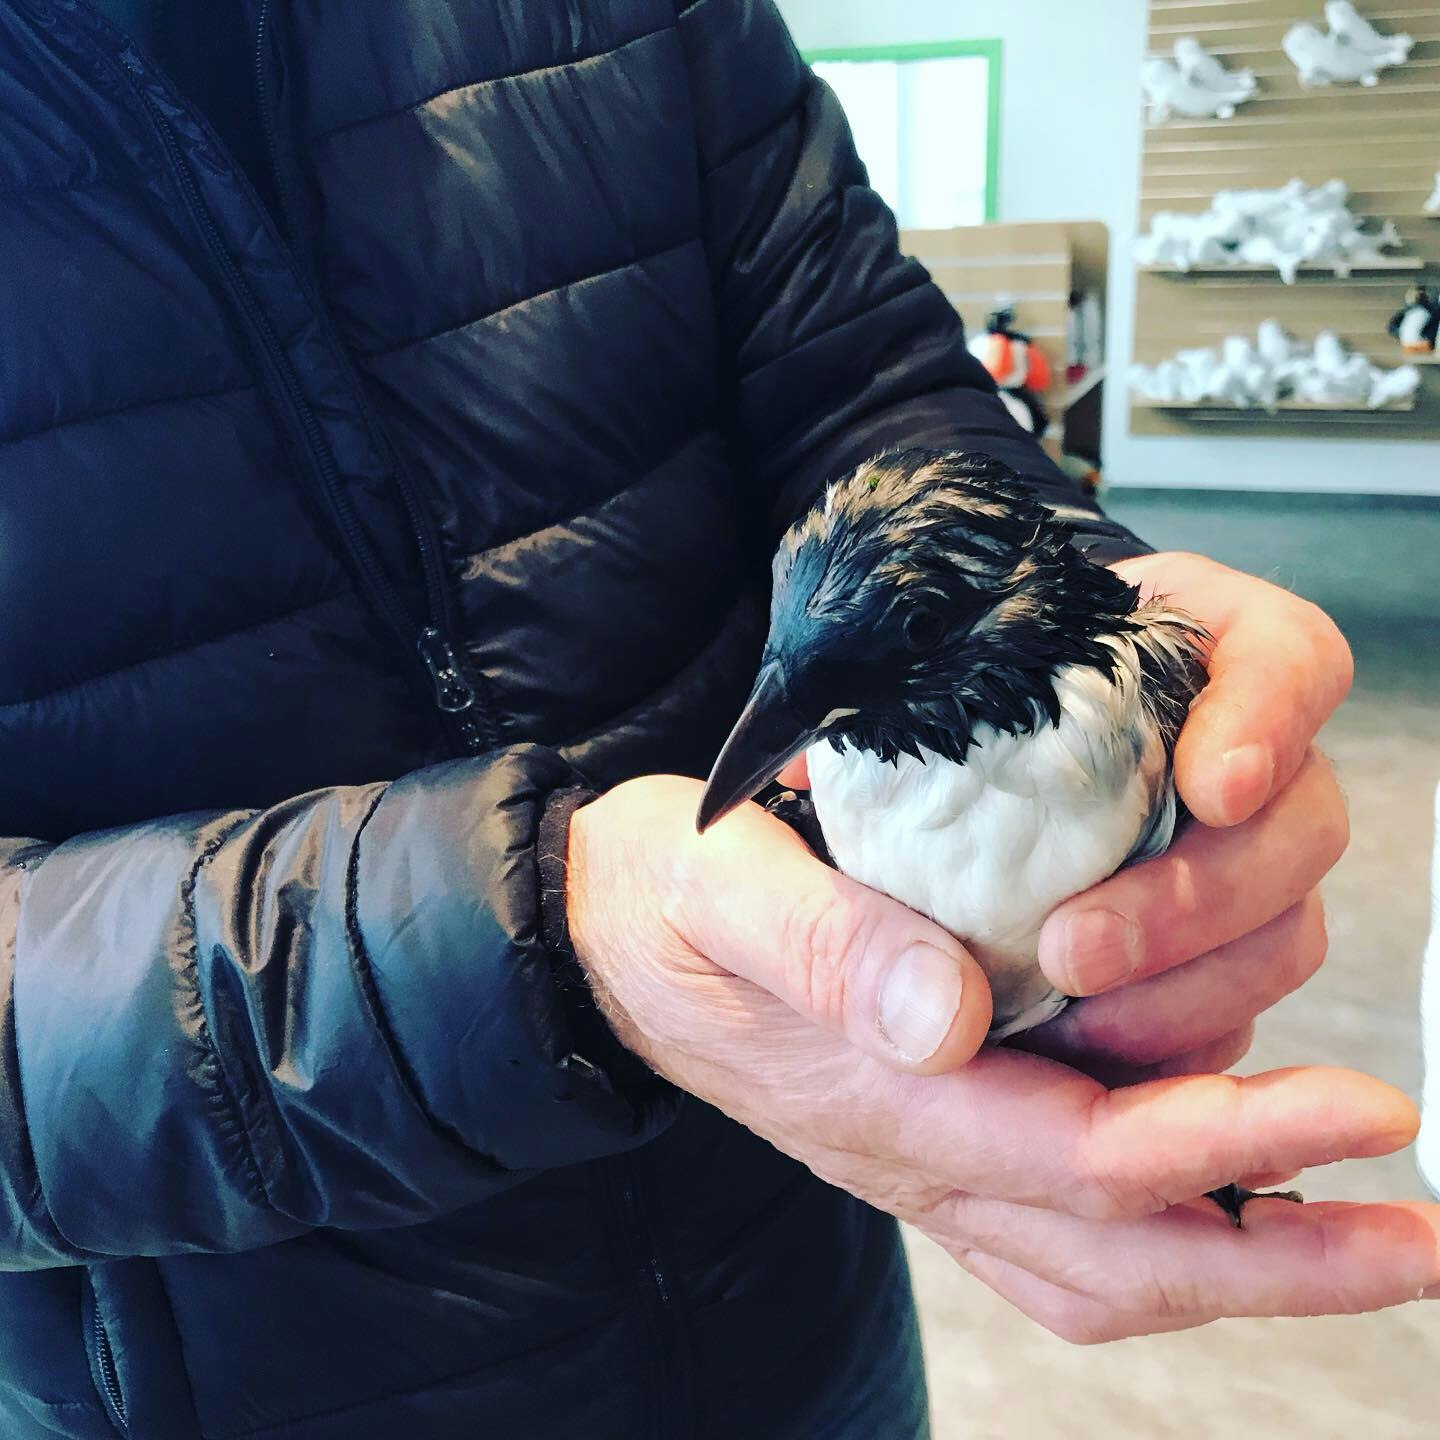 A damp, ruffled puffling fits easily in the large palms of an Icelandic fisherman in a black puffer coat. In the background are shelves full of toy beluga whales and puffins at the Sea Life Trust